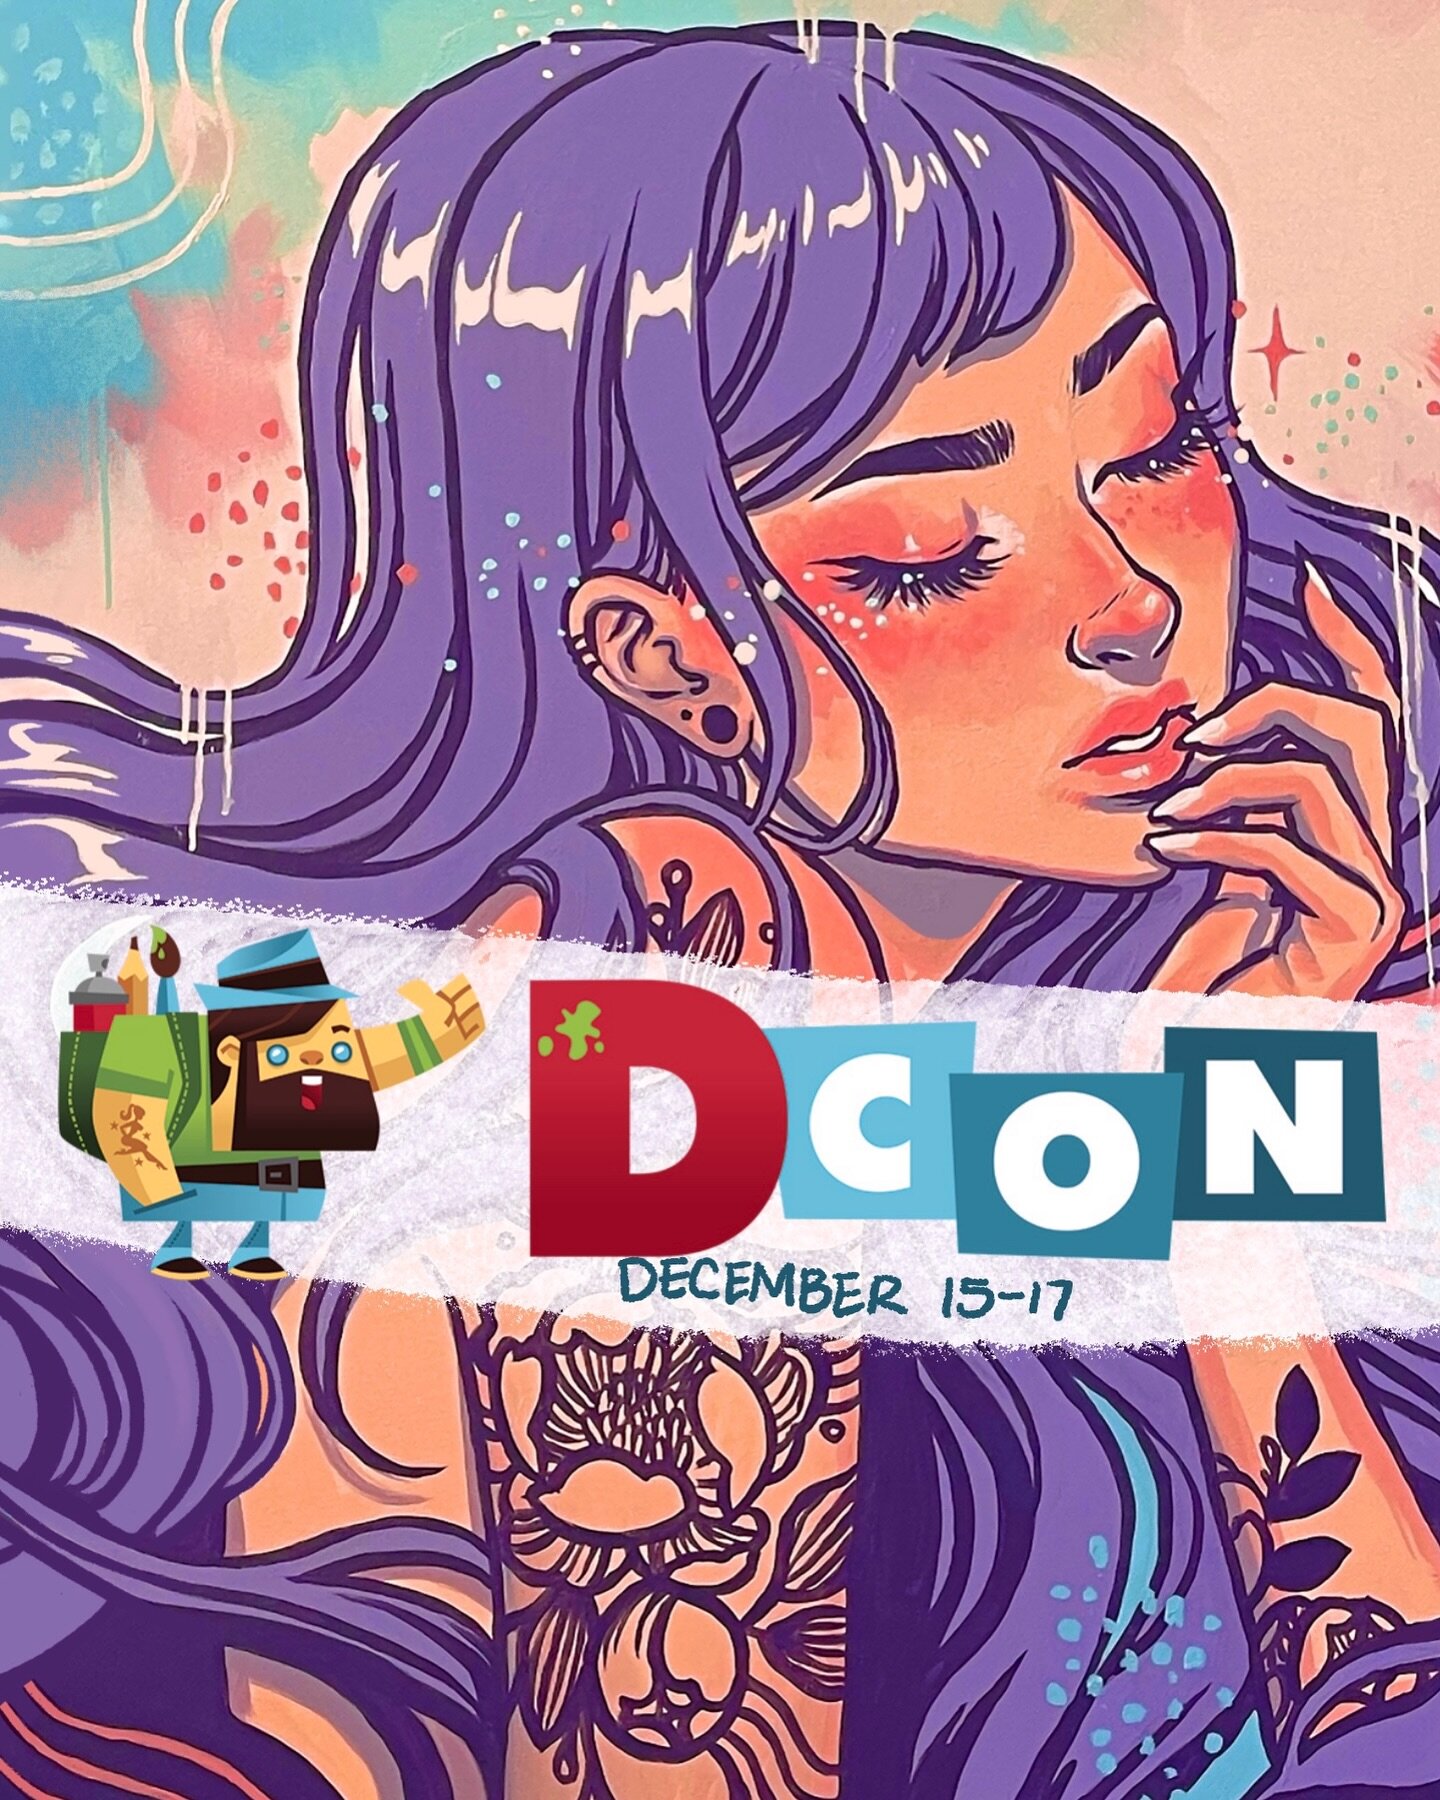 hello socal! i'm going to be at @designercon next weekend, sharing booth 723 with @7amcreations 🥳🎉 it's my first time going to dcon since 2015 and i'm so exciteddd
if you like toys and cool art you might want to stop by! December 15-17 at the Anahe